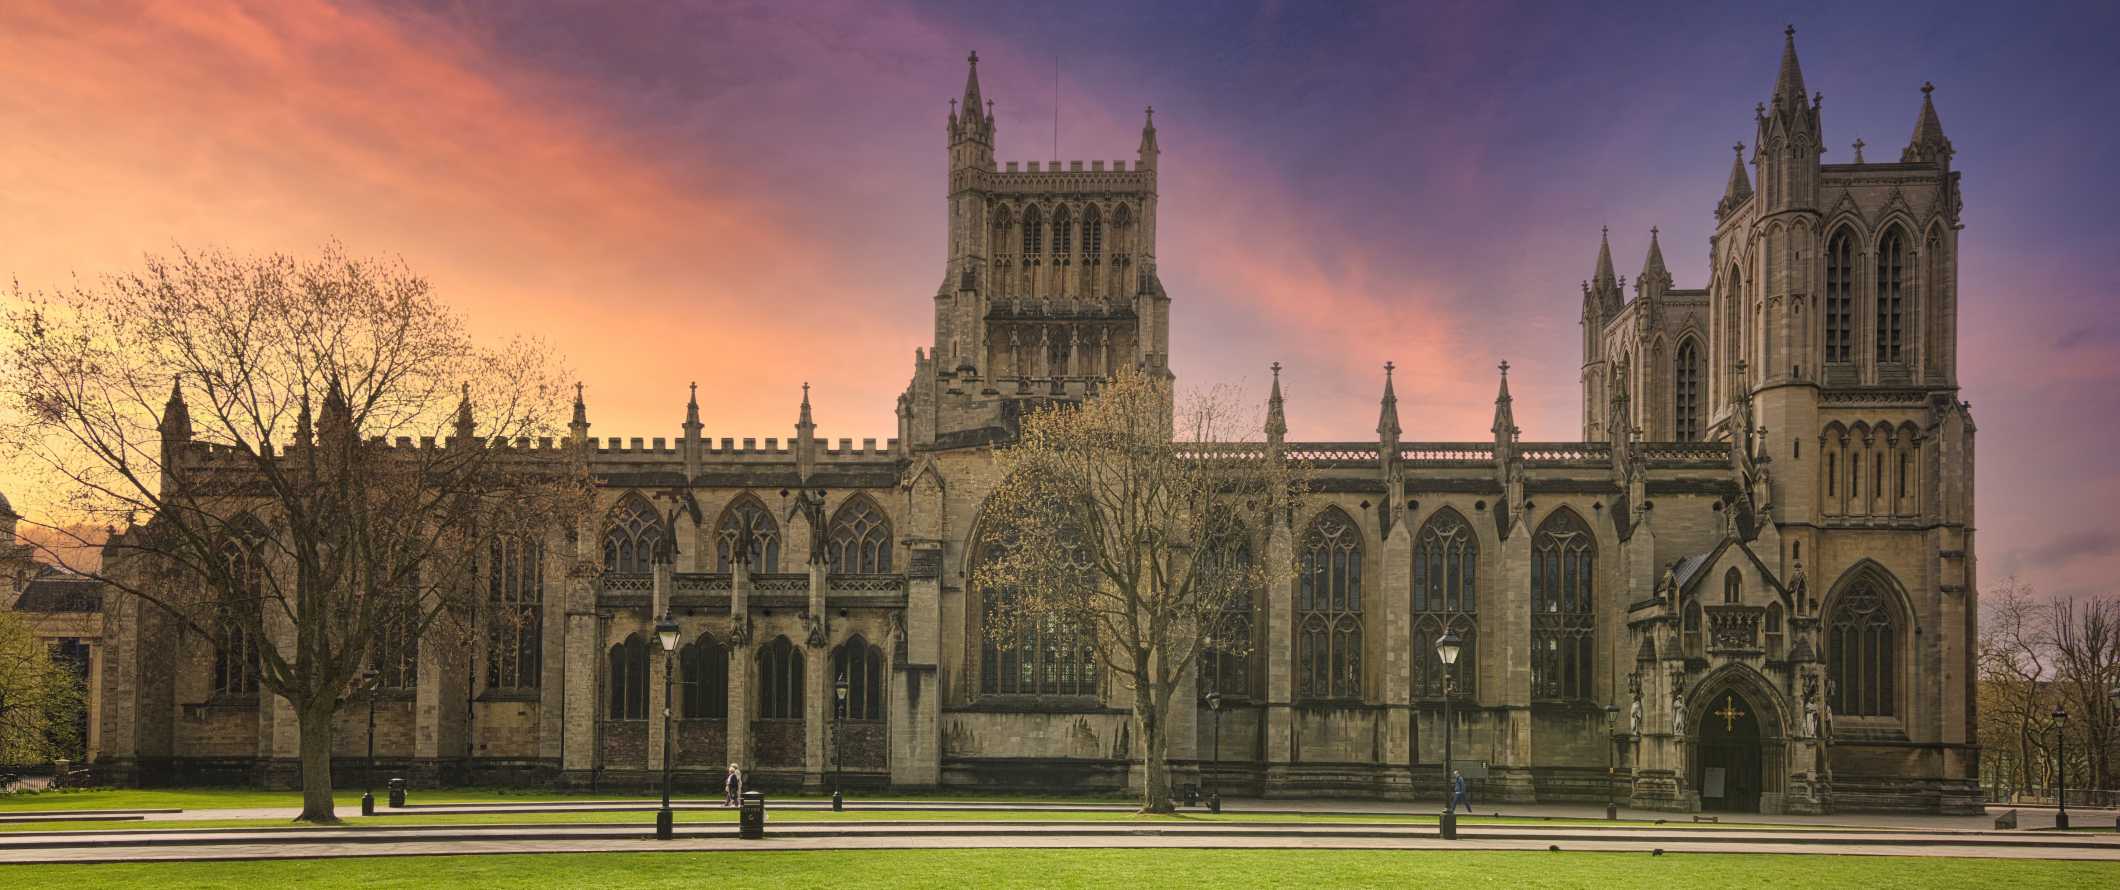 Cathedral at sunset in Bristol, England